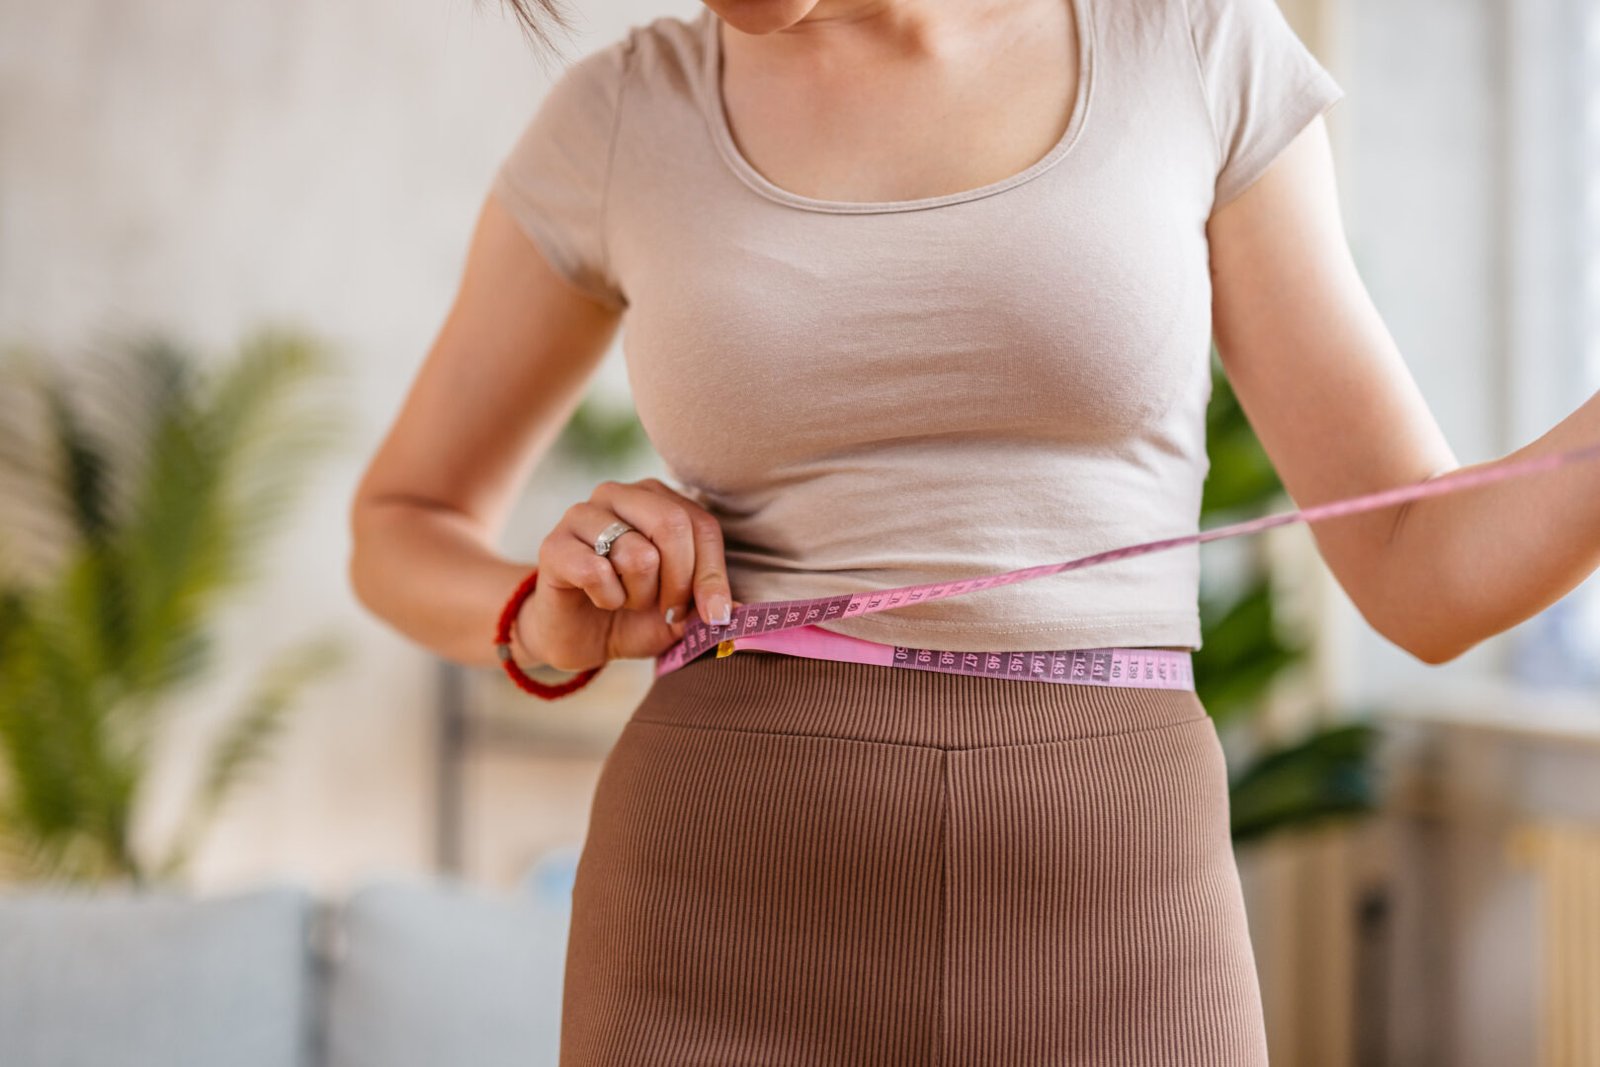 A woman uses a measuring tape to measure her weight loss progress on a flax seed diet.